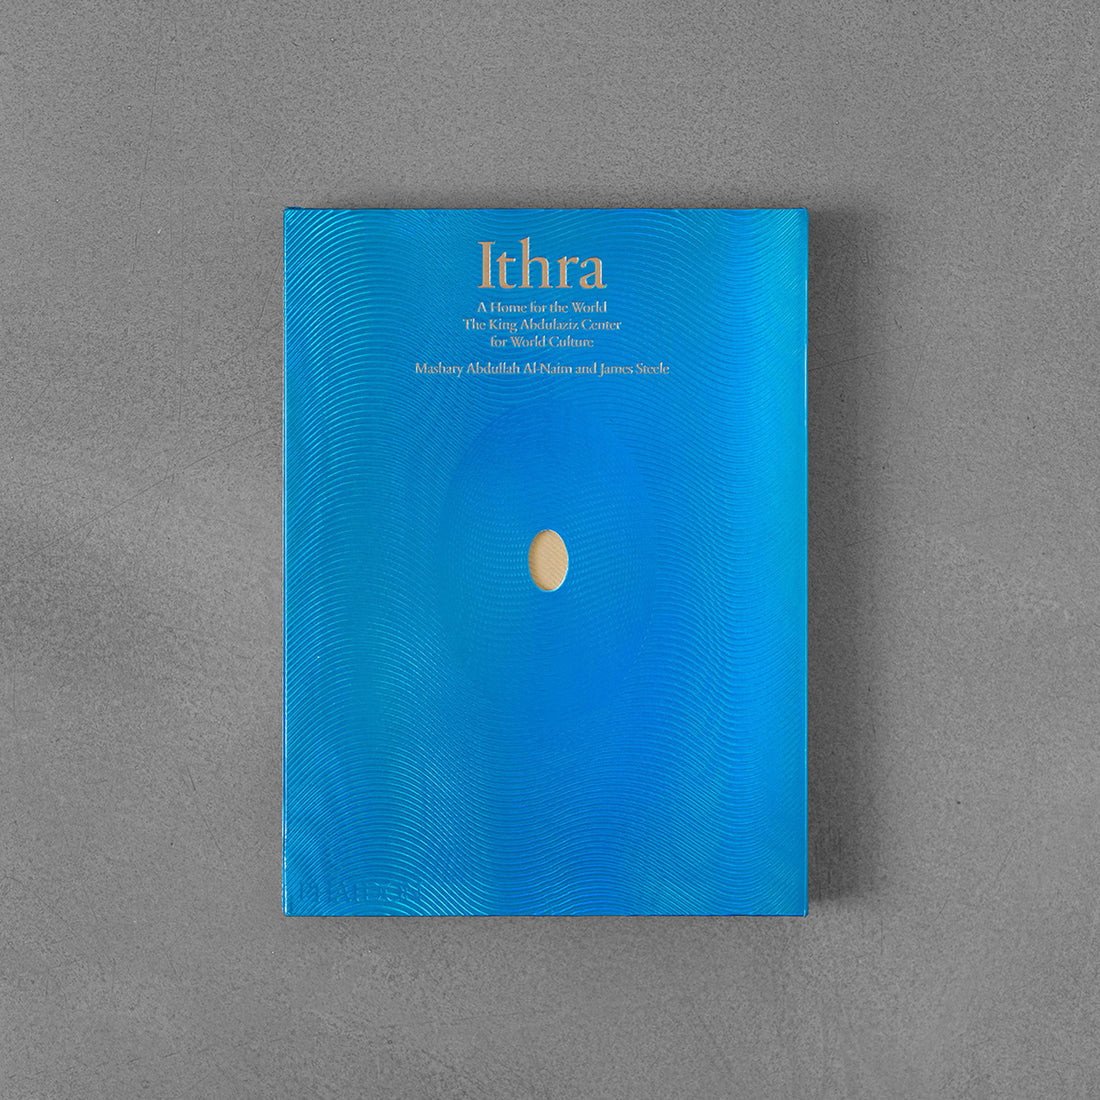 Ithra: A Home for the World (The King Abdulaziz Center for World Culture)